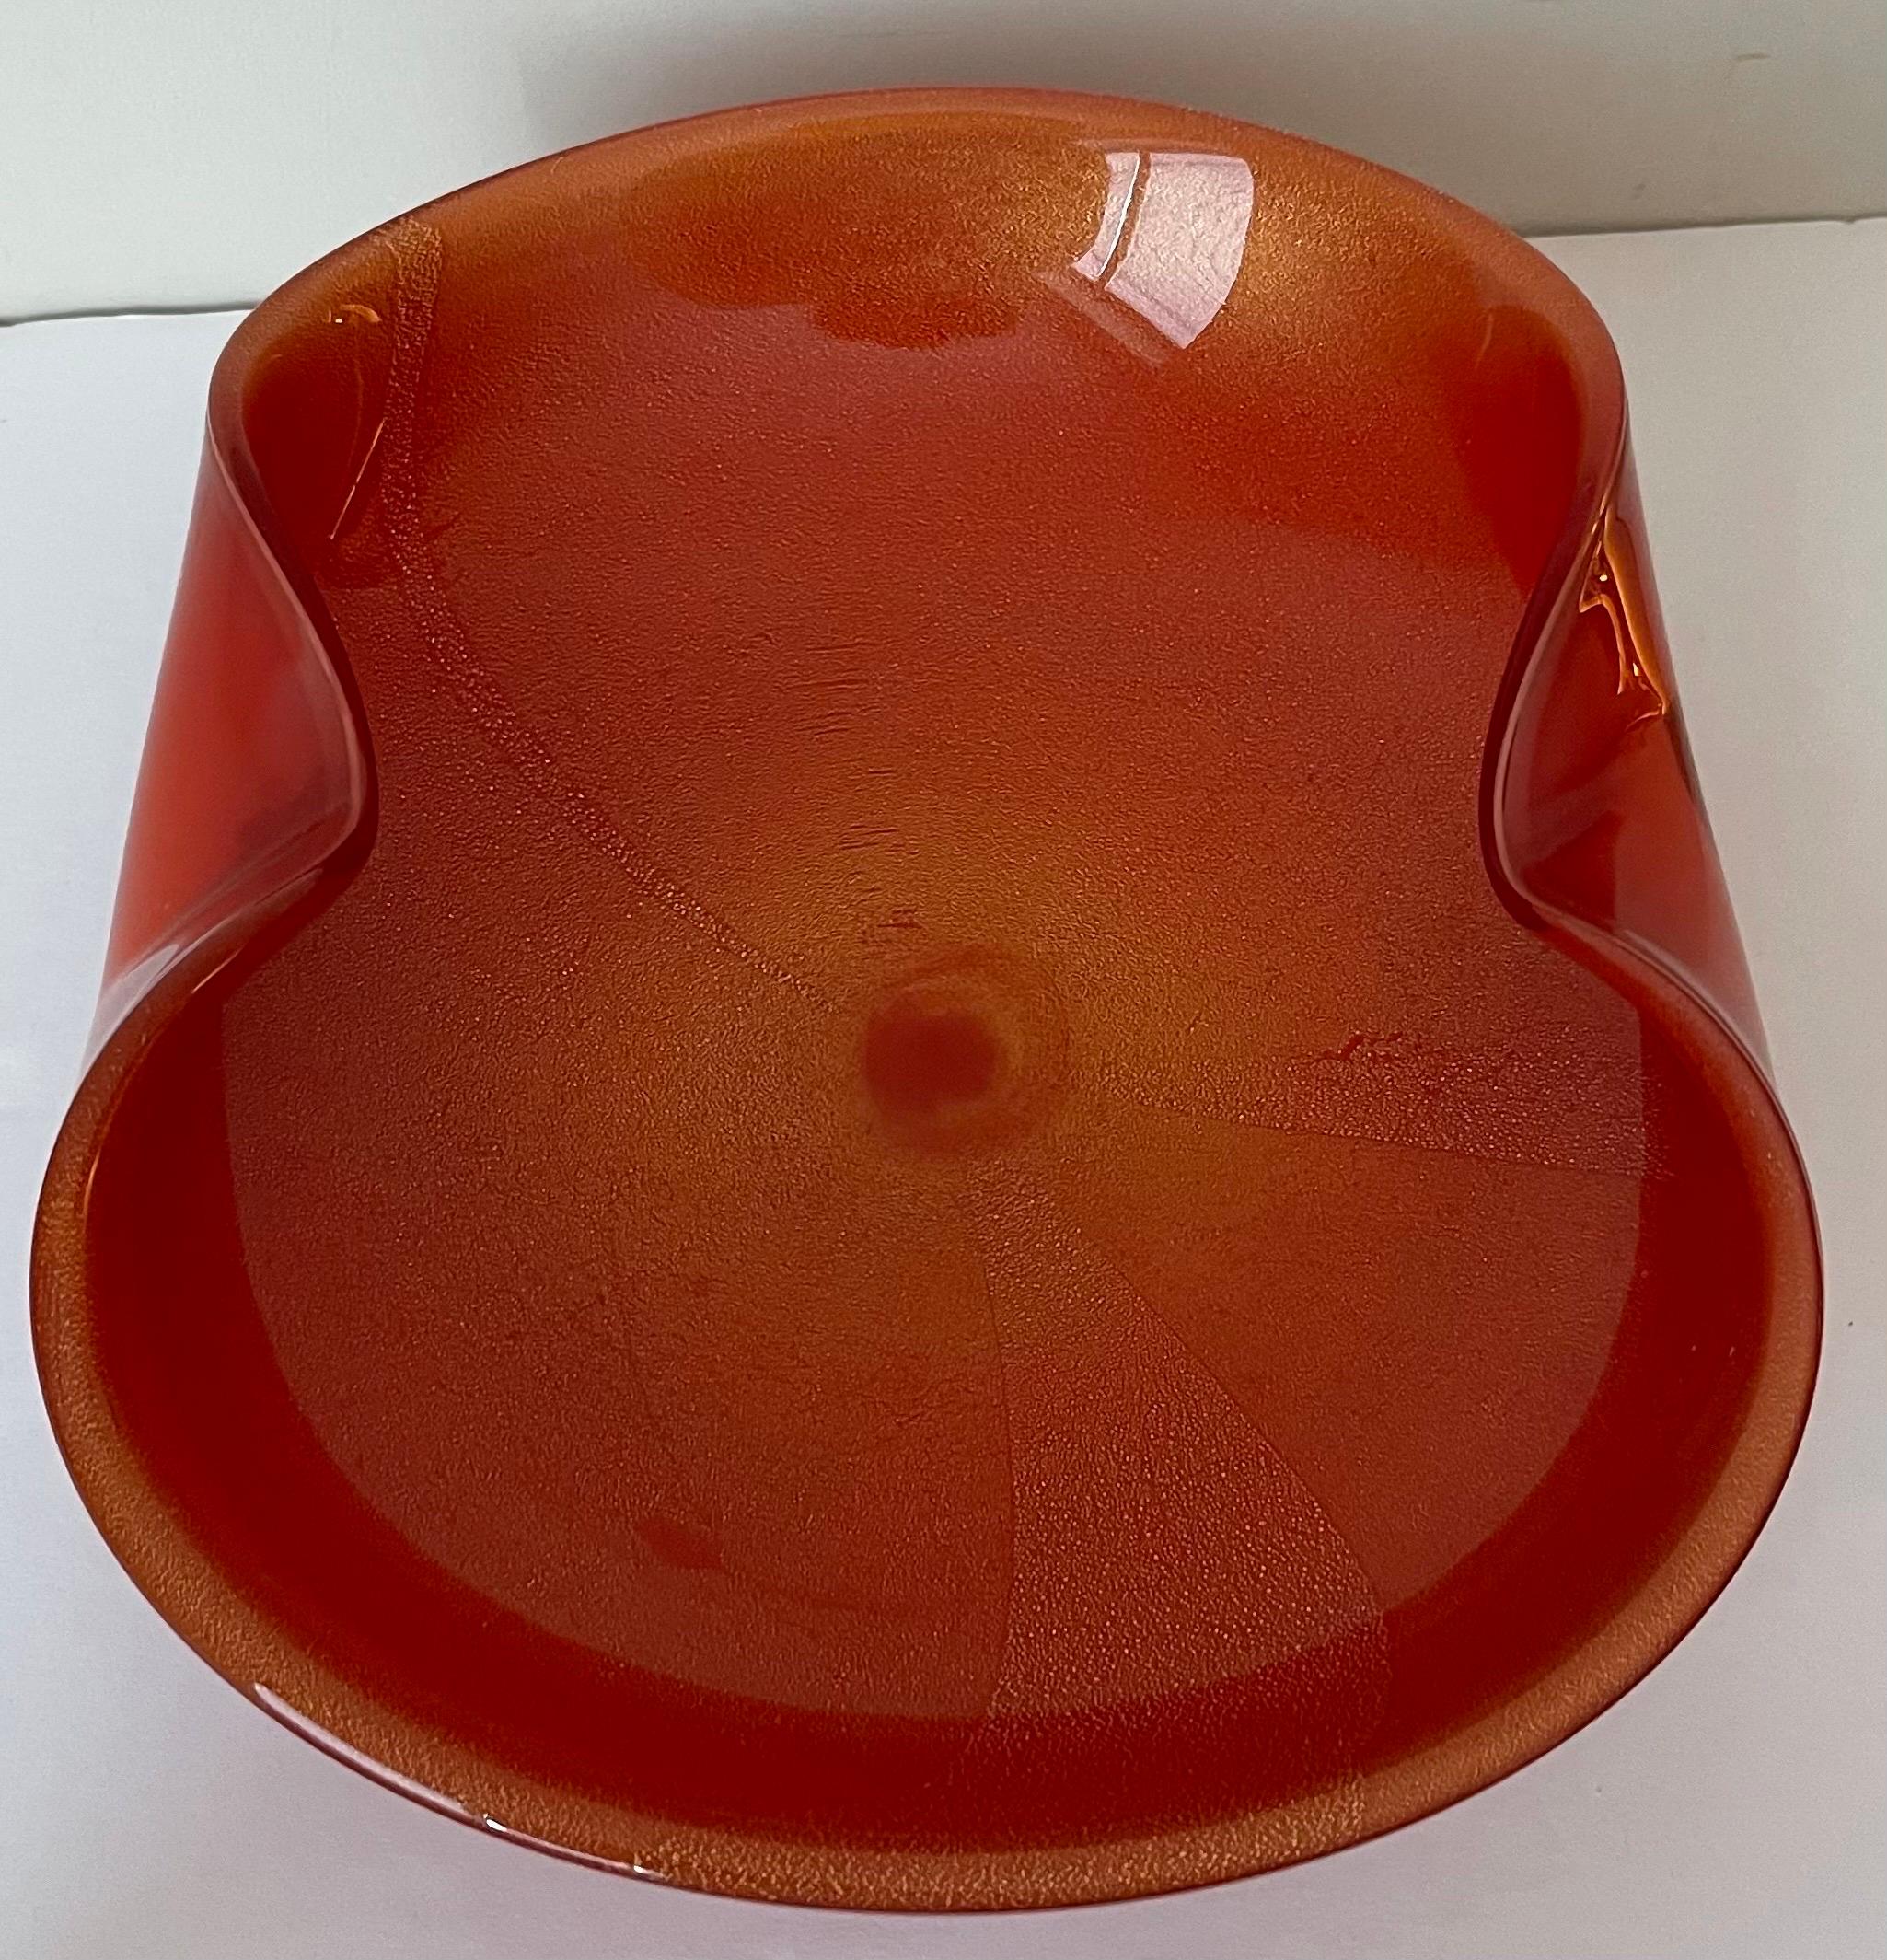 Large mid-century Murano glass ashtray by Barbini. Orange glass with all-over gold flecks and lightly swirled center design.